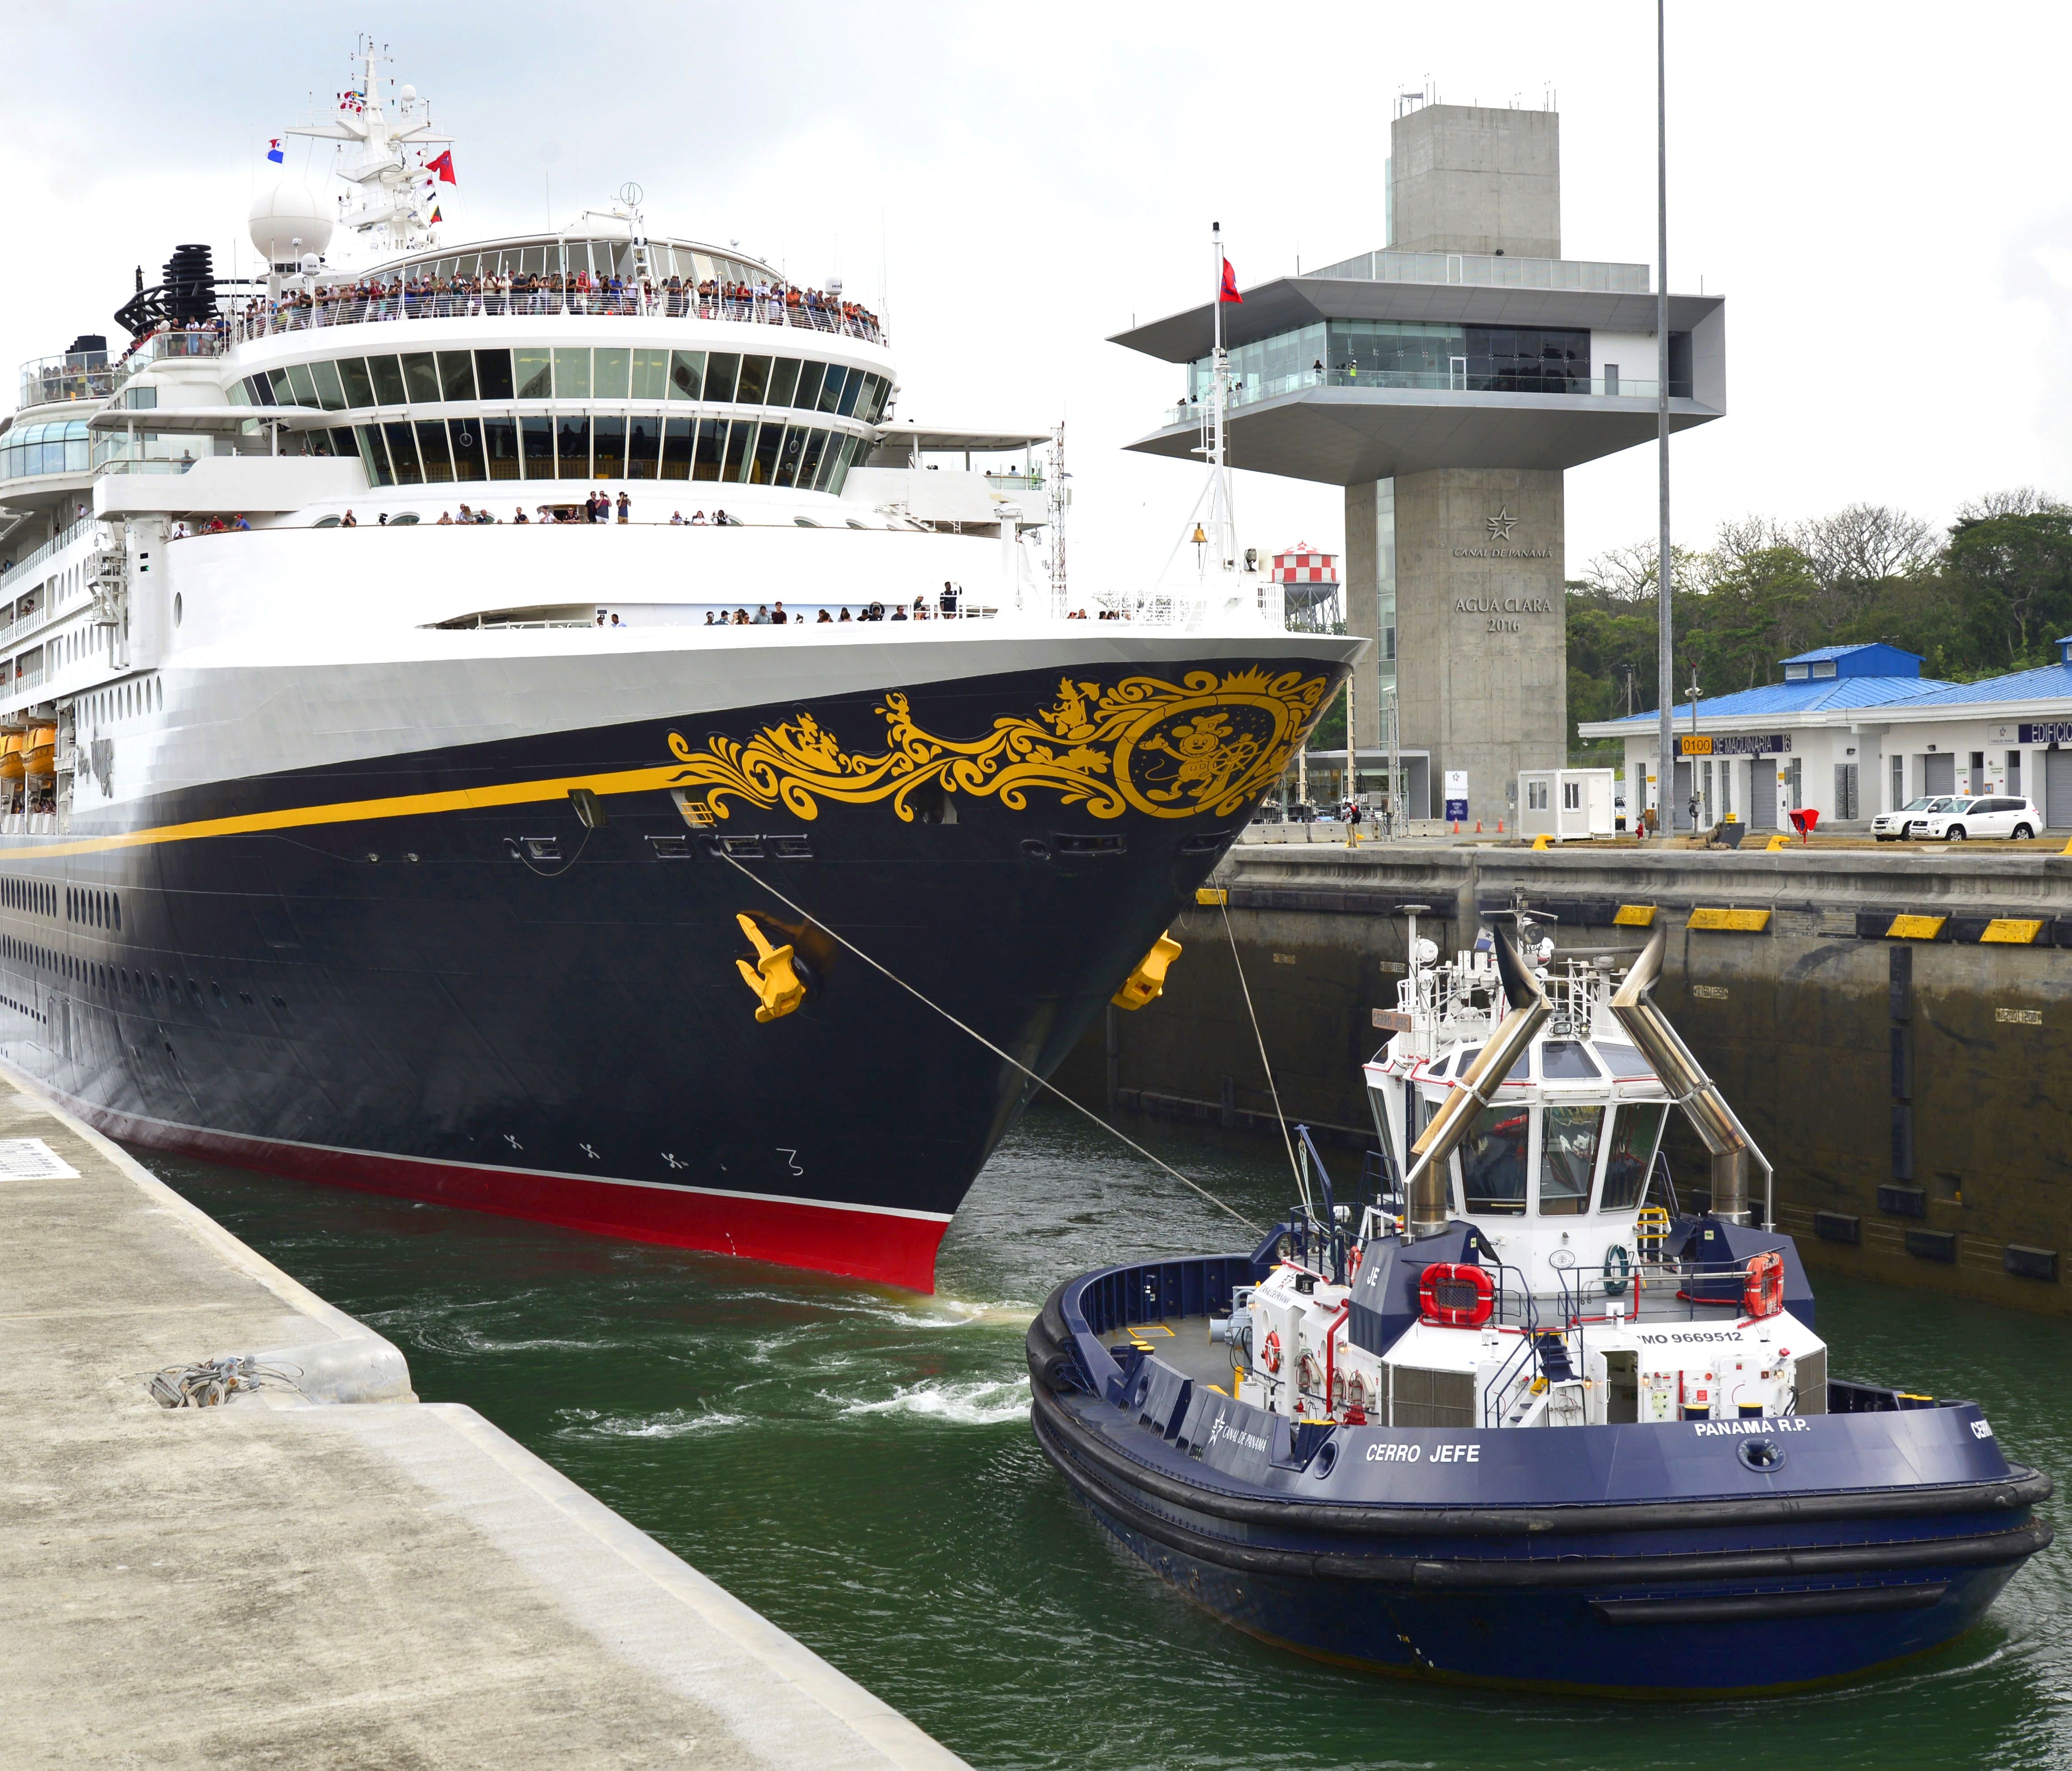 Disney Cruise Line's Disney Wonder on April 29, 2017 became the first cruise ship to transit the Panama Canal's new, bigger locks.